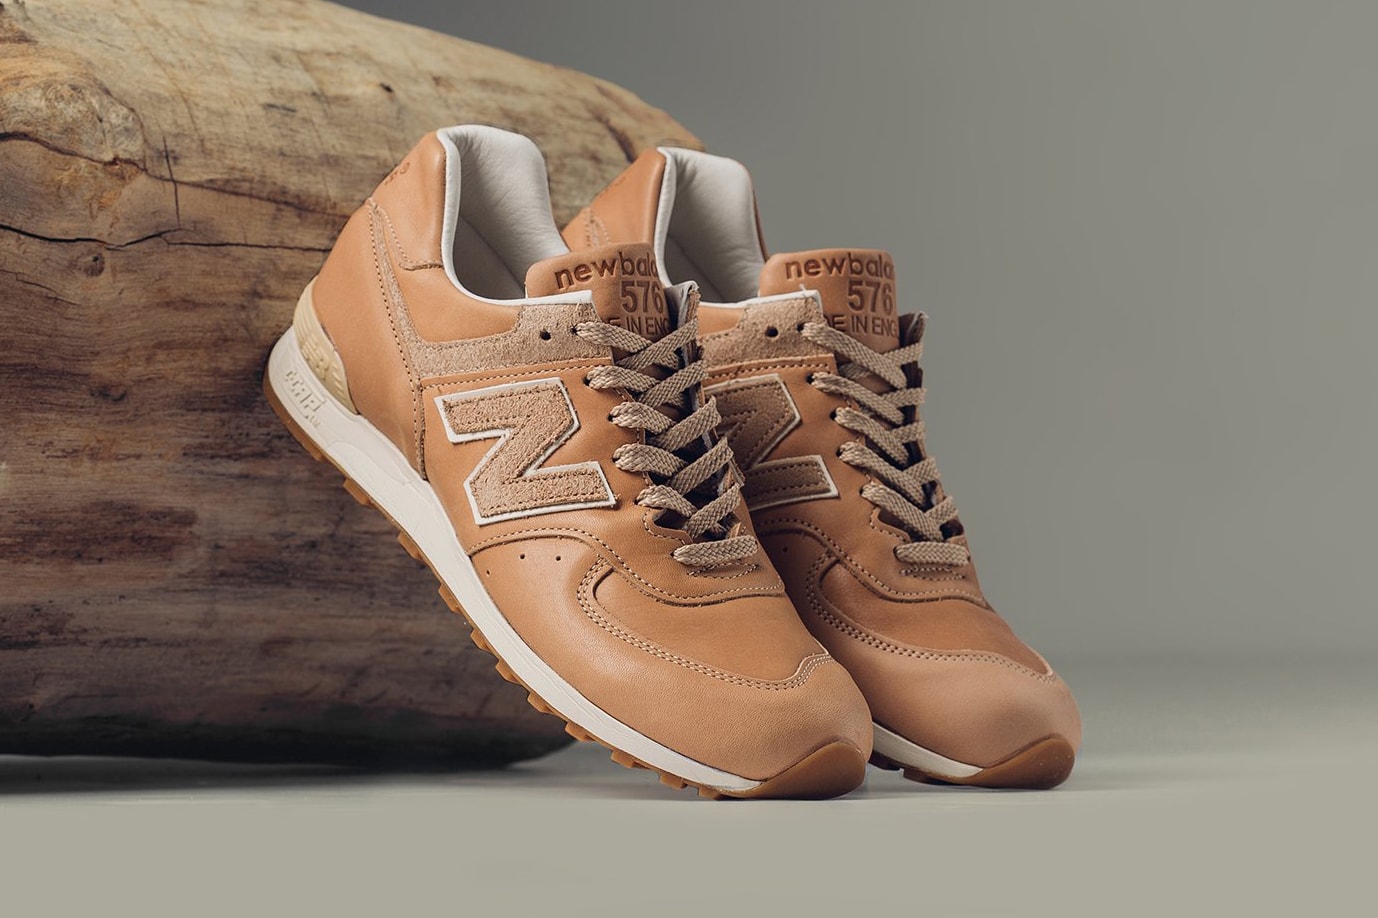 Why Sneaker Brands Need to Cool It with Vegetable Tan Leather